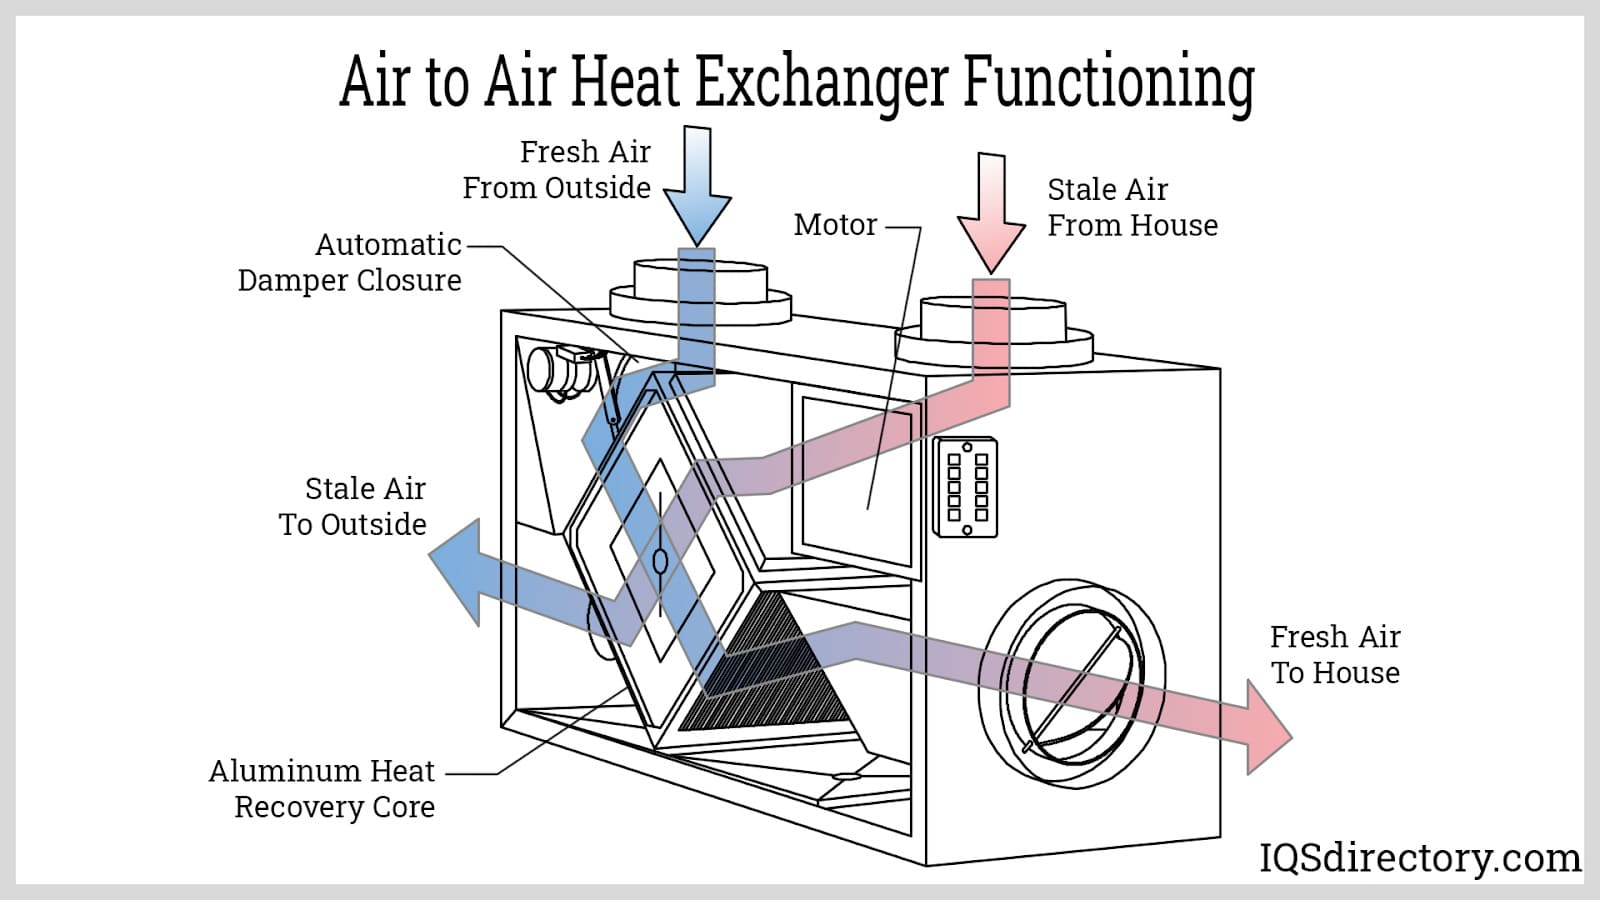 Air to Air Heat Exchanger Functioning